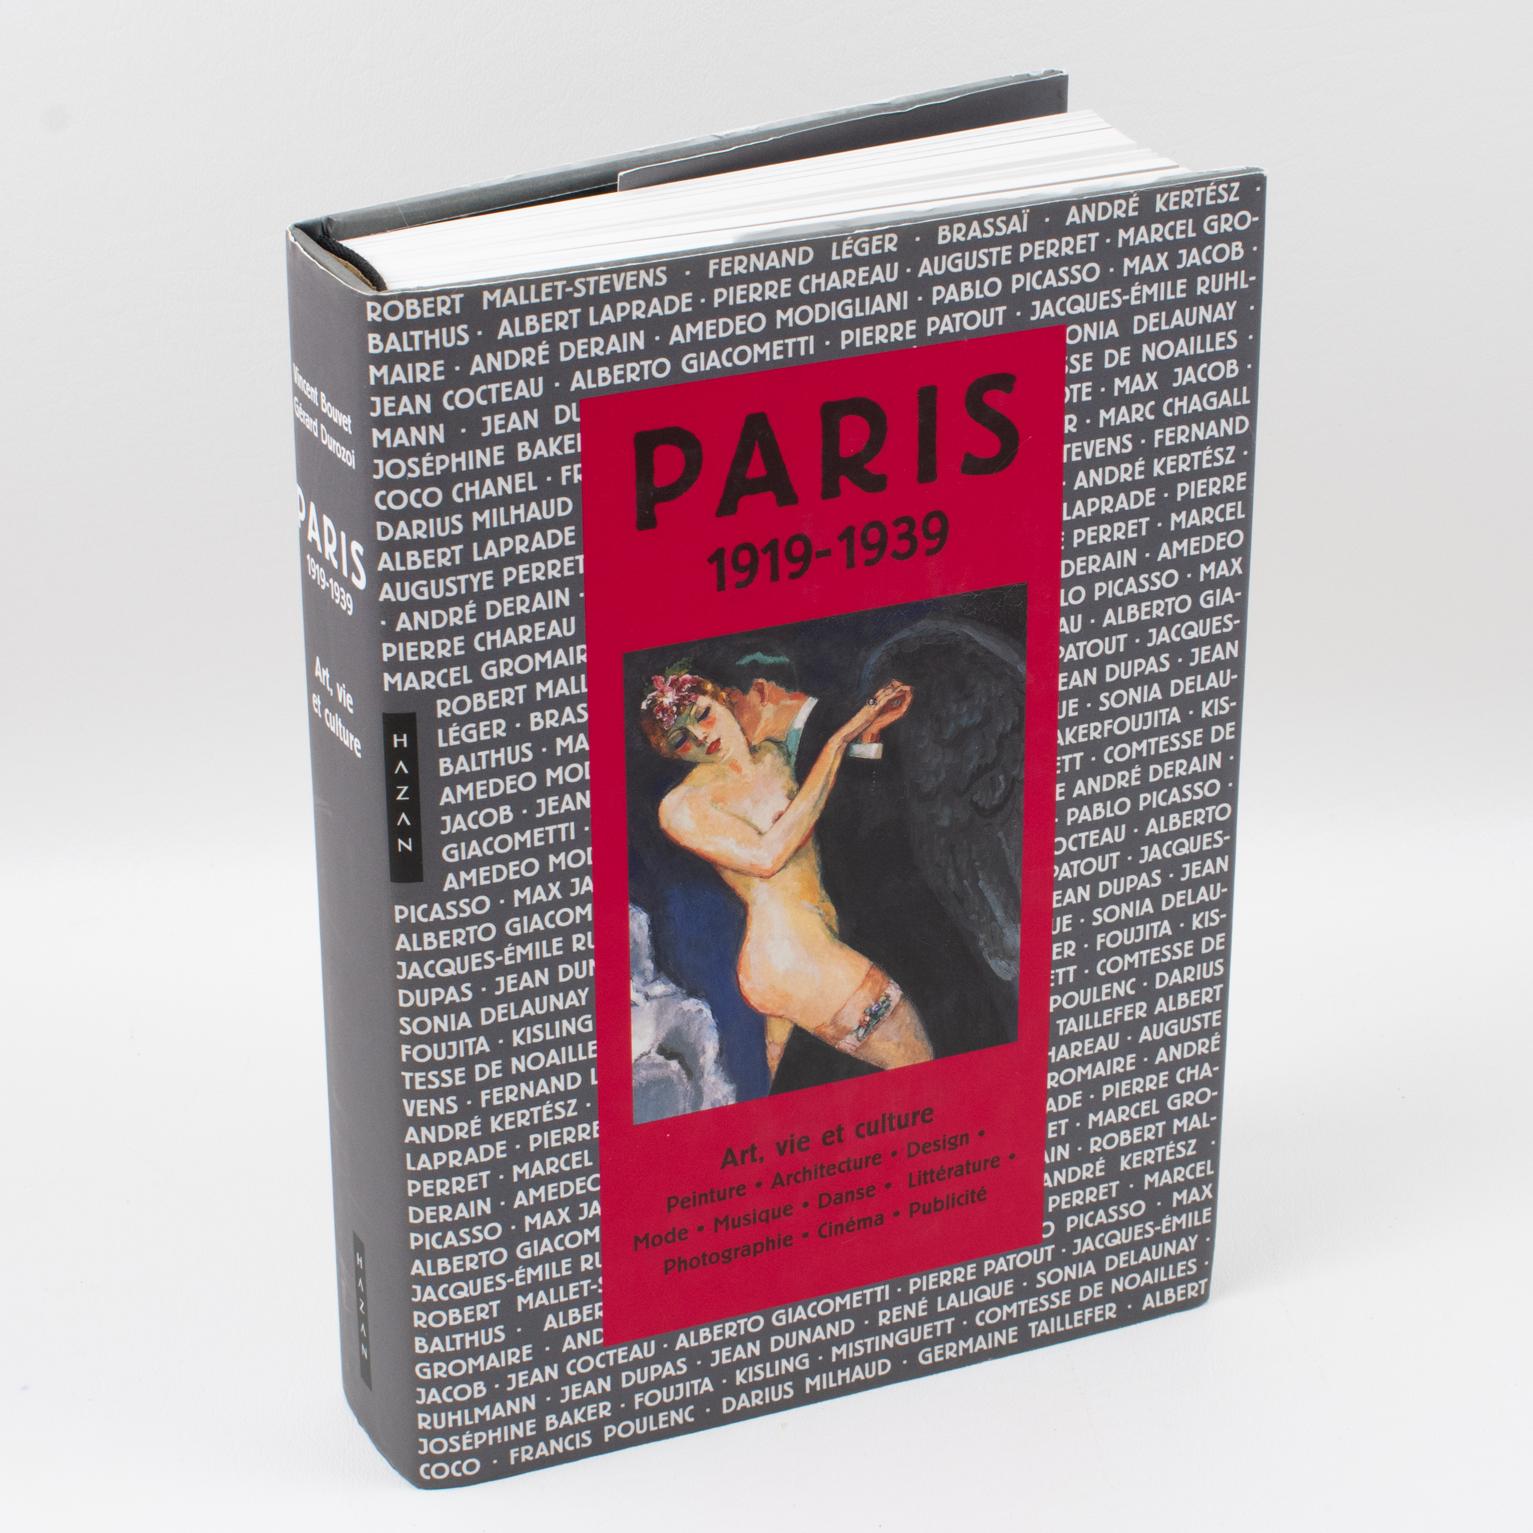 Paris 1919 - 1929 Art, Vie et Culture (art, life, and culture), French book by Vincent Bouvet et Gérad Durozoi, 2009.
Paris was an international melting pot of arts and letters during the inter-war period.
Between the parade of the Allies in 1919